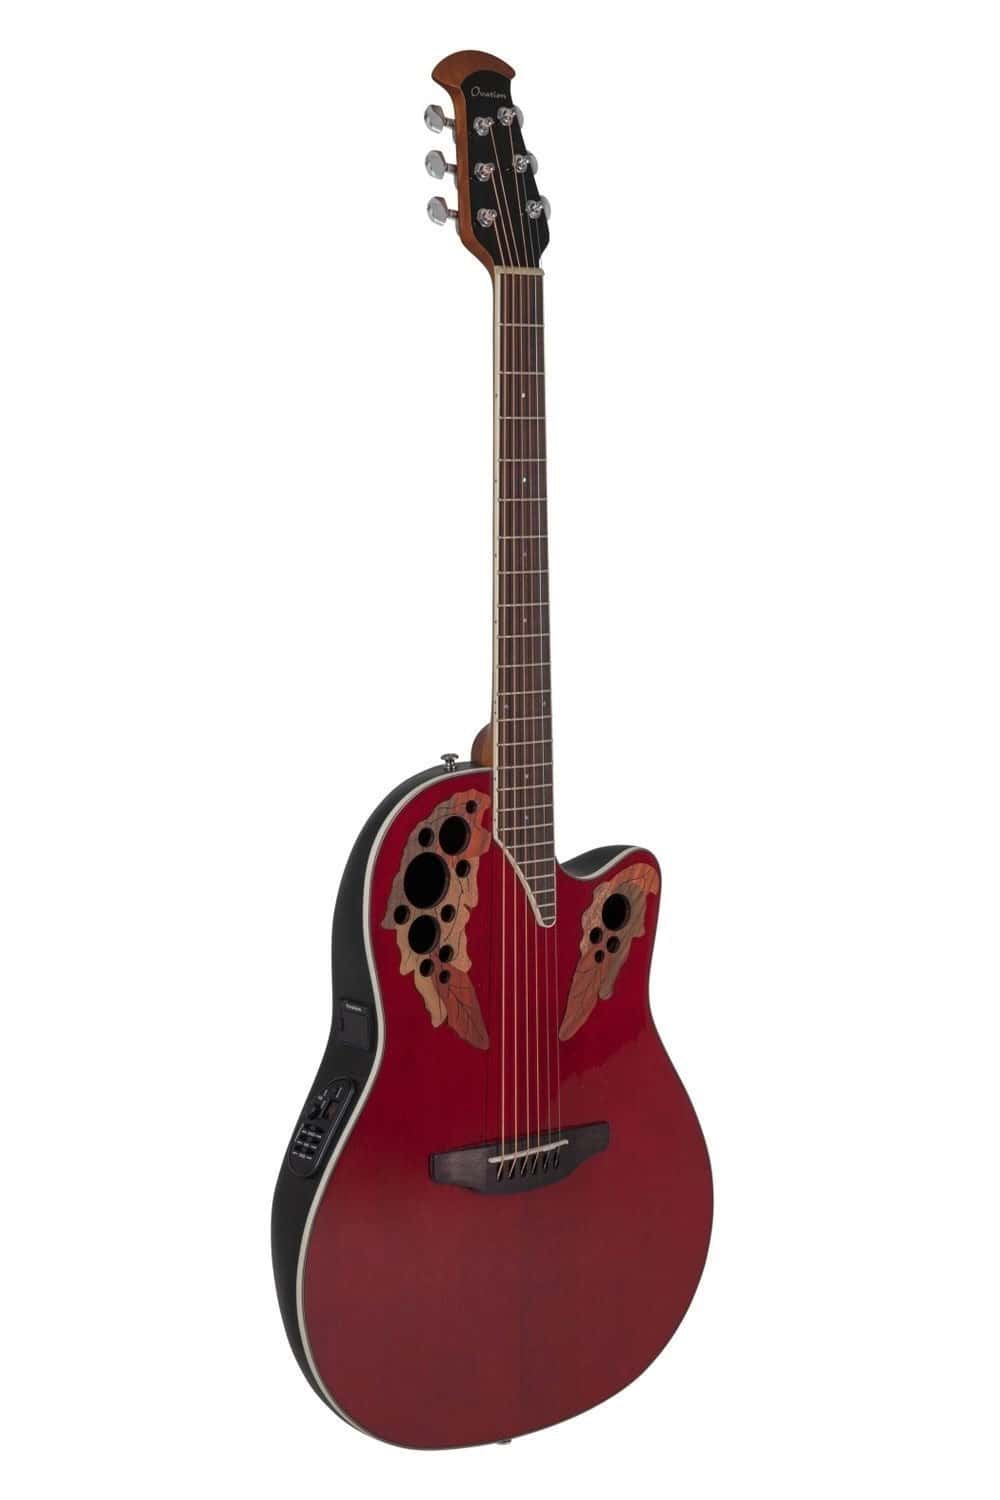 OVATION E-ACOUSTIC GUITAR CELEBRITY ELITE SUPER SHALLOW CUTAWAY RUBY RED